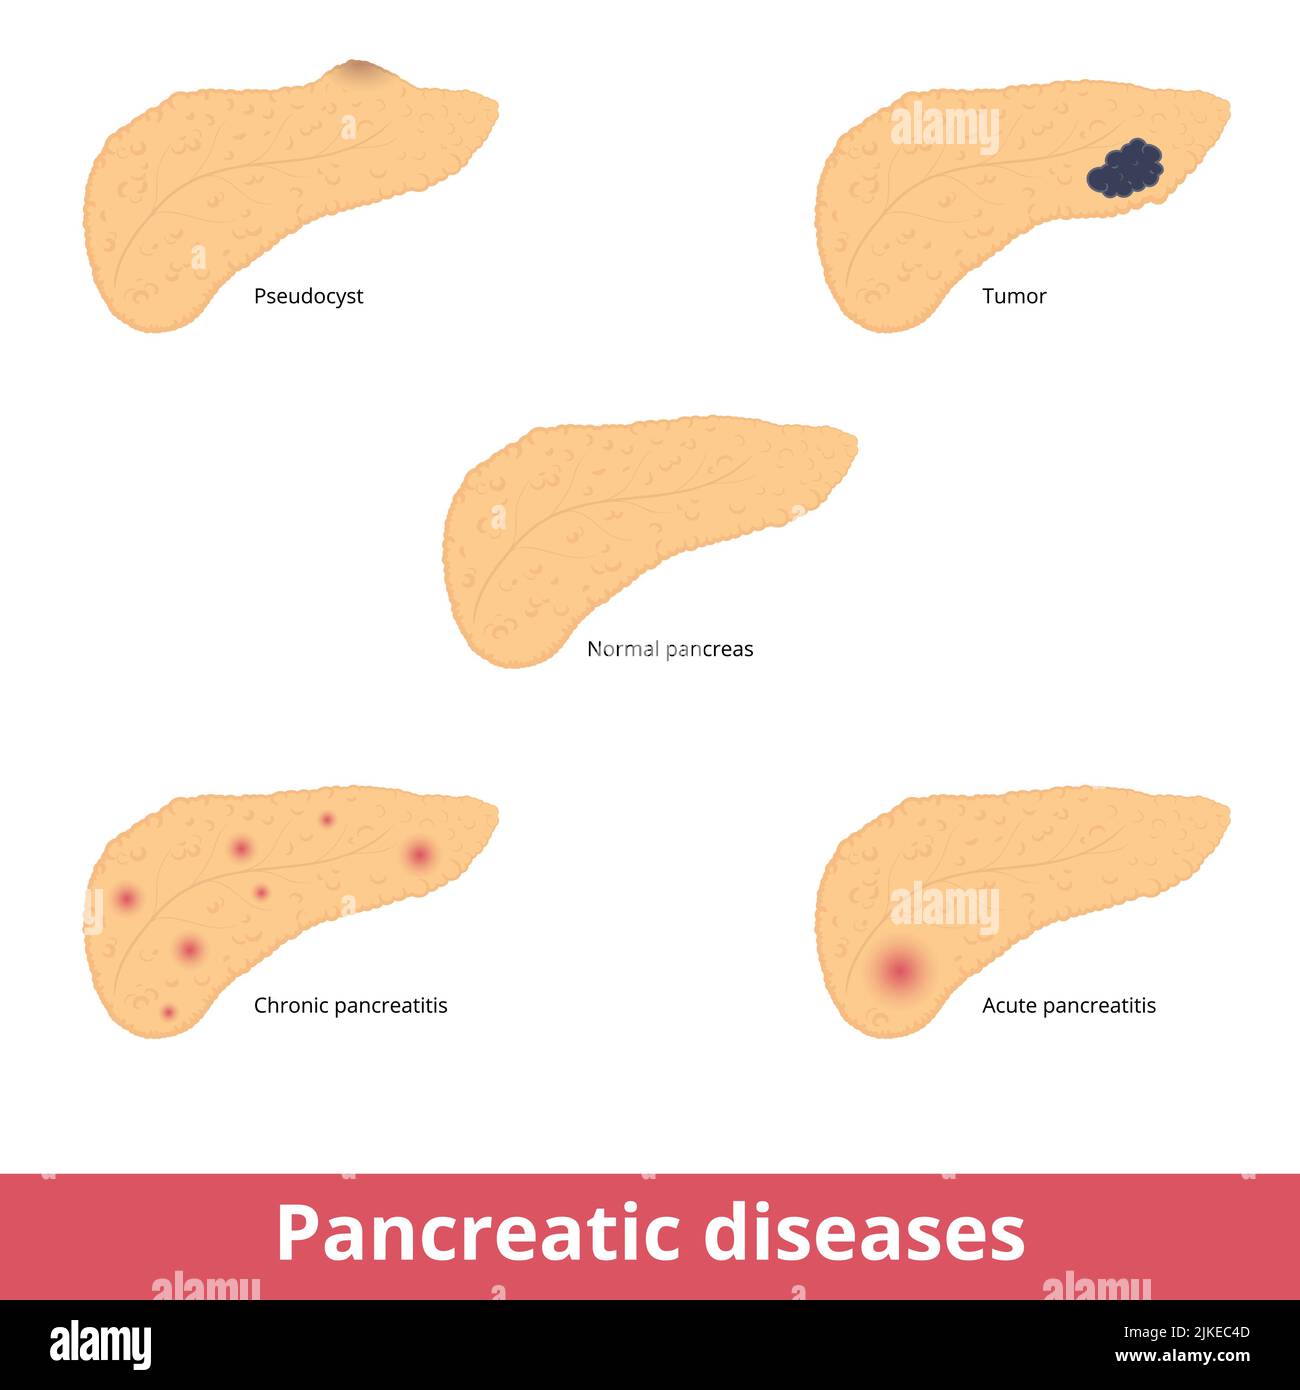 Pancreatic diseases. Visualization of common pancreatic diseases including pseudocyst, tumor, chronic and acute pancreatitis. Stock Vector